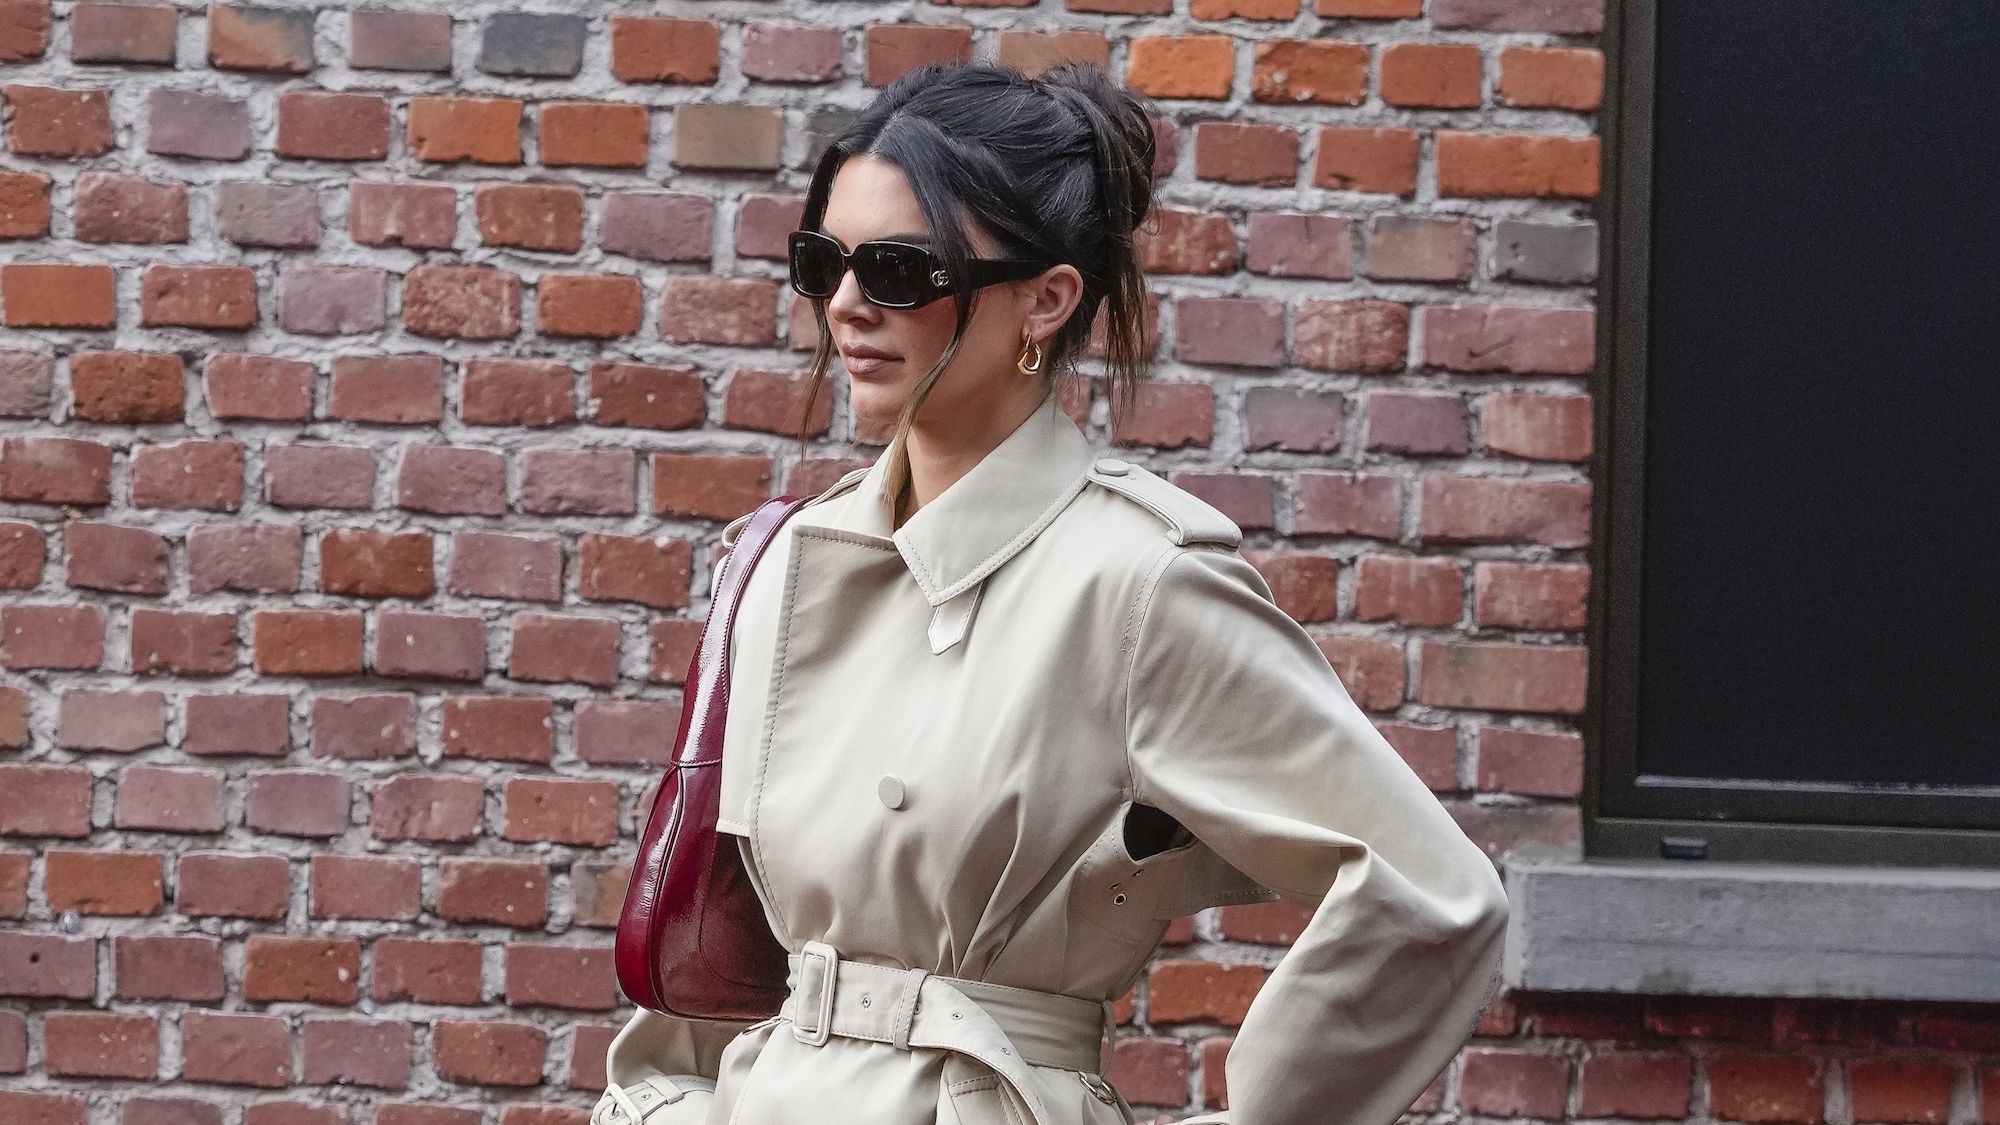 Kendall tucked her trench coat into her skirt in Paris